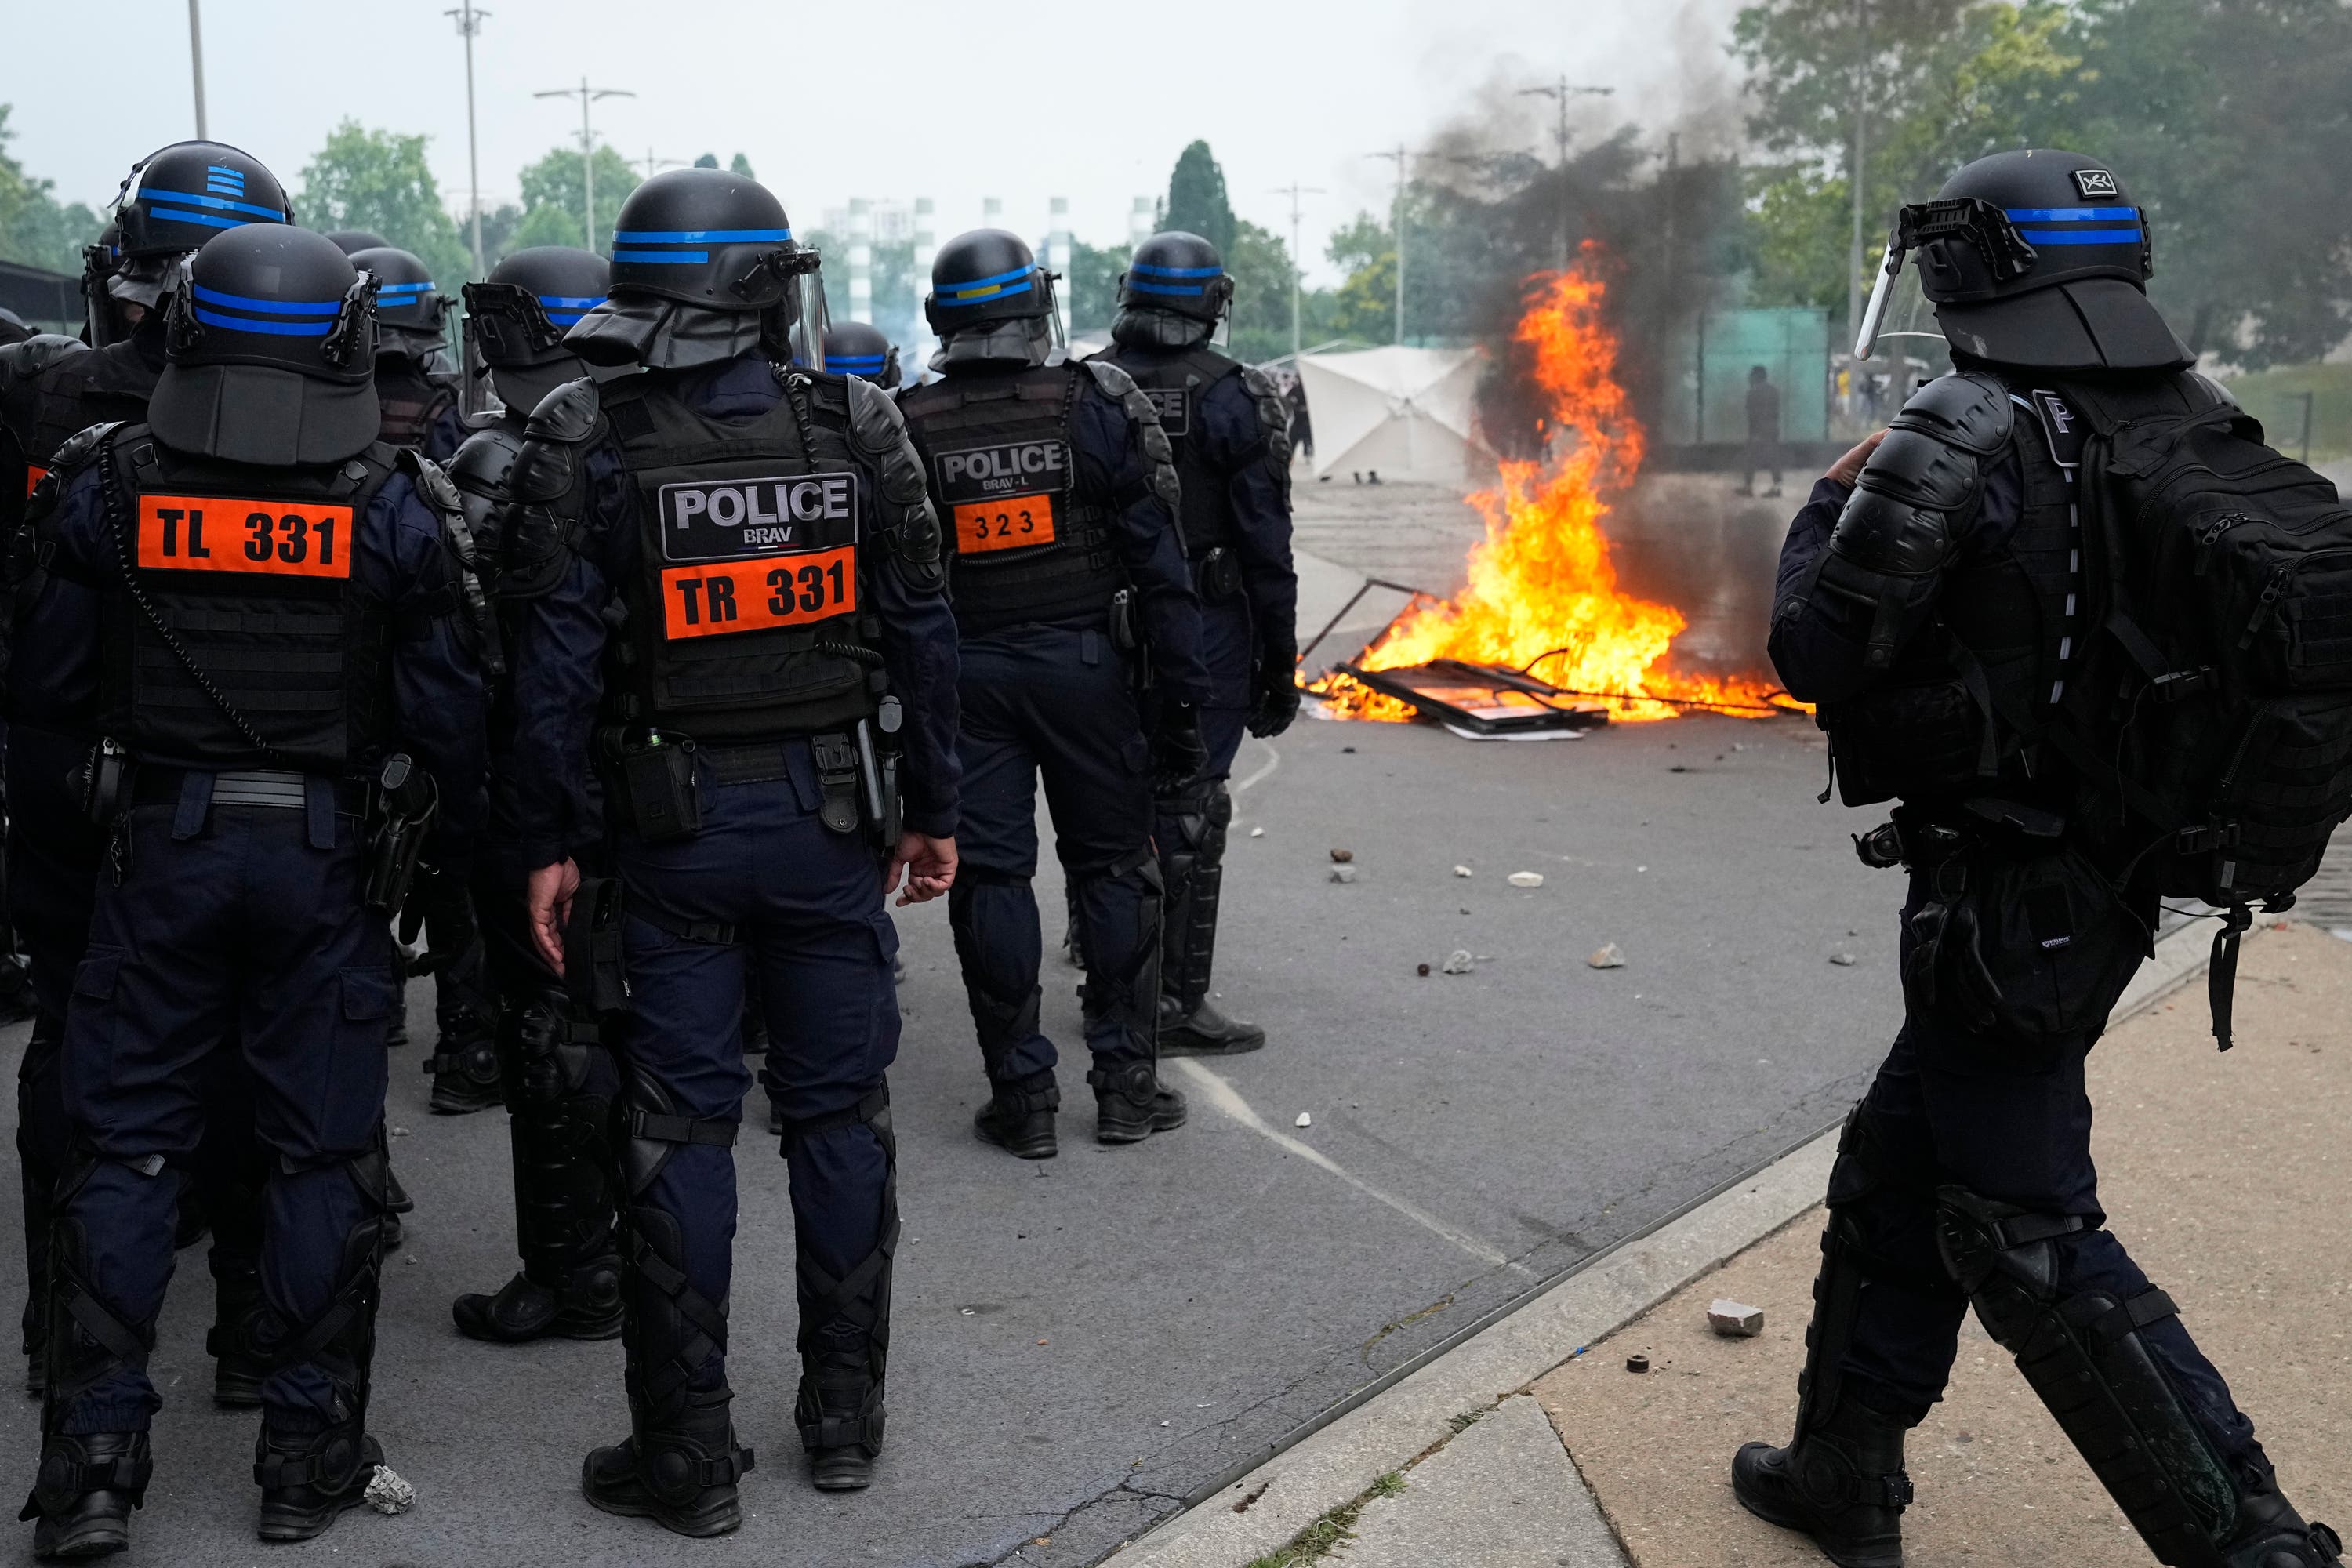 Riot police officers stand by a fire after a march for Nahel in Nanterre.